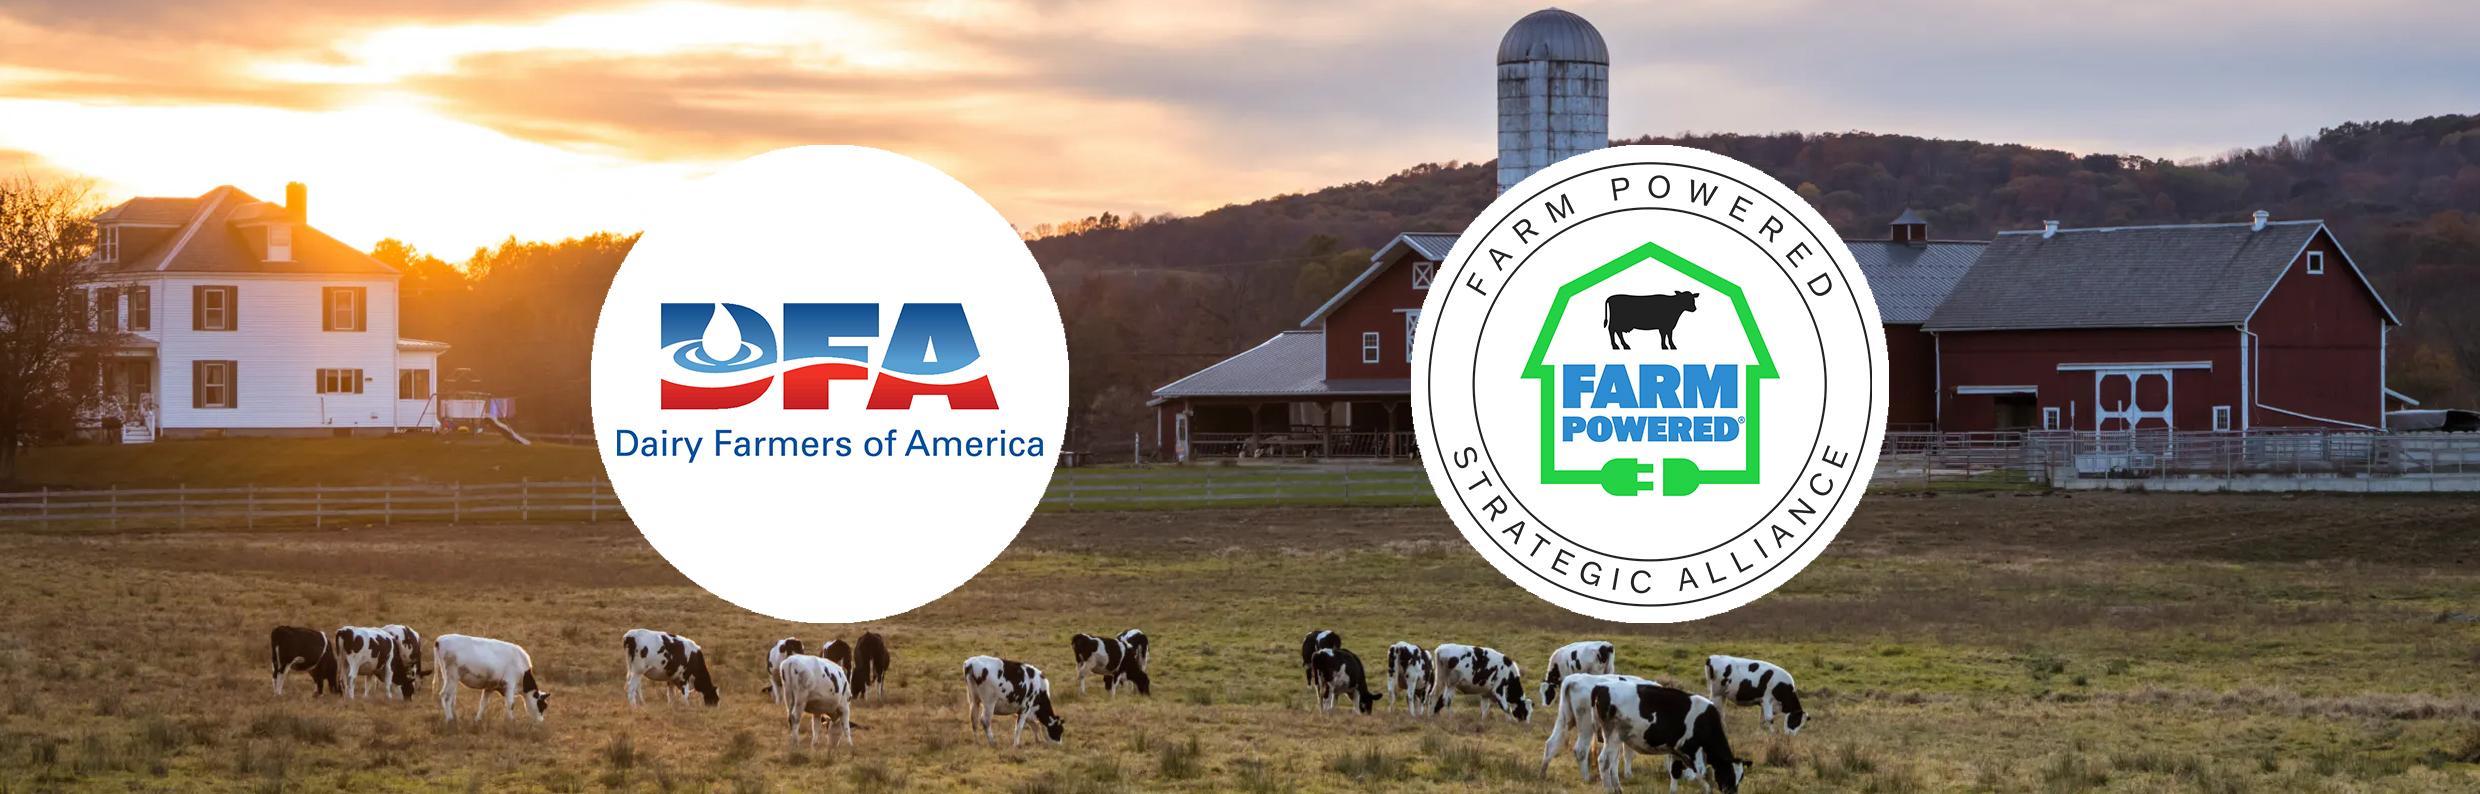 Logos of Dairy Farmers of America and Farm Powered Strategic Alliance, with a background image of a farm using anaerobic digestion